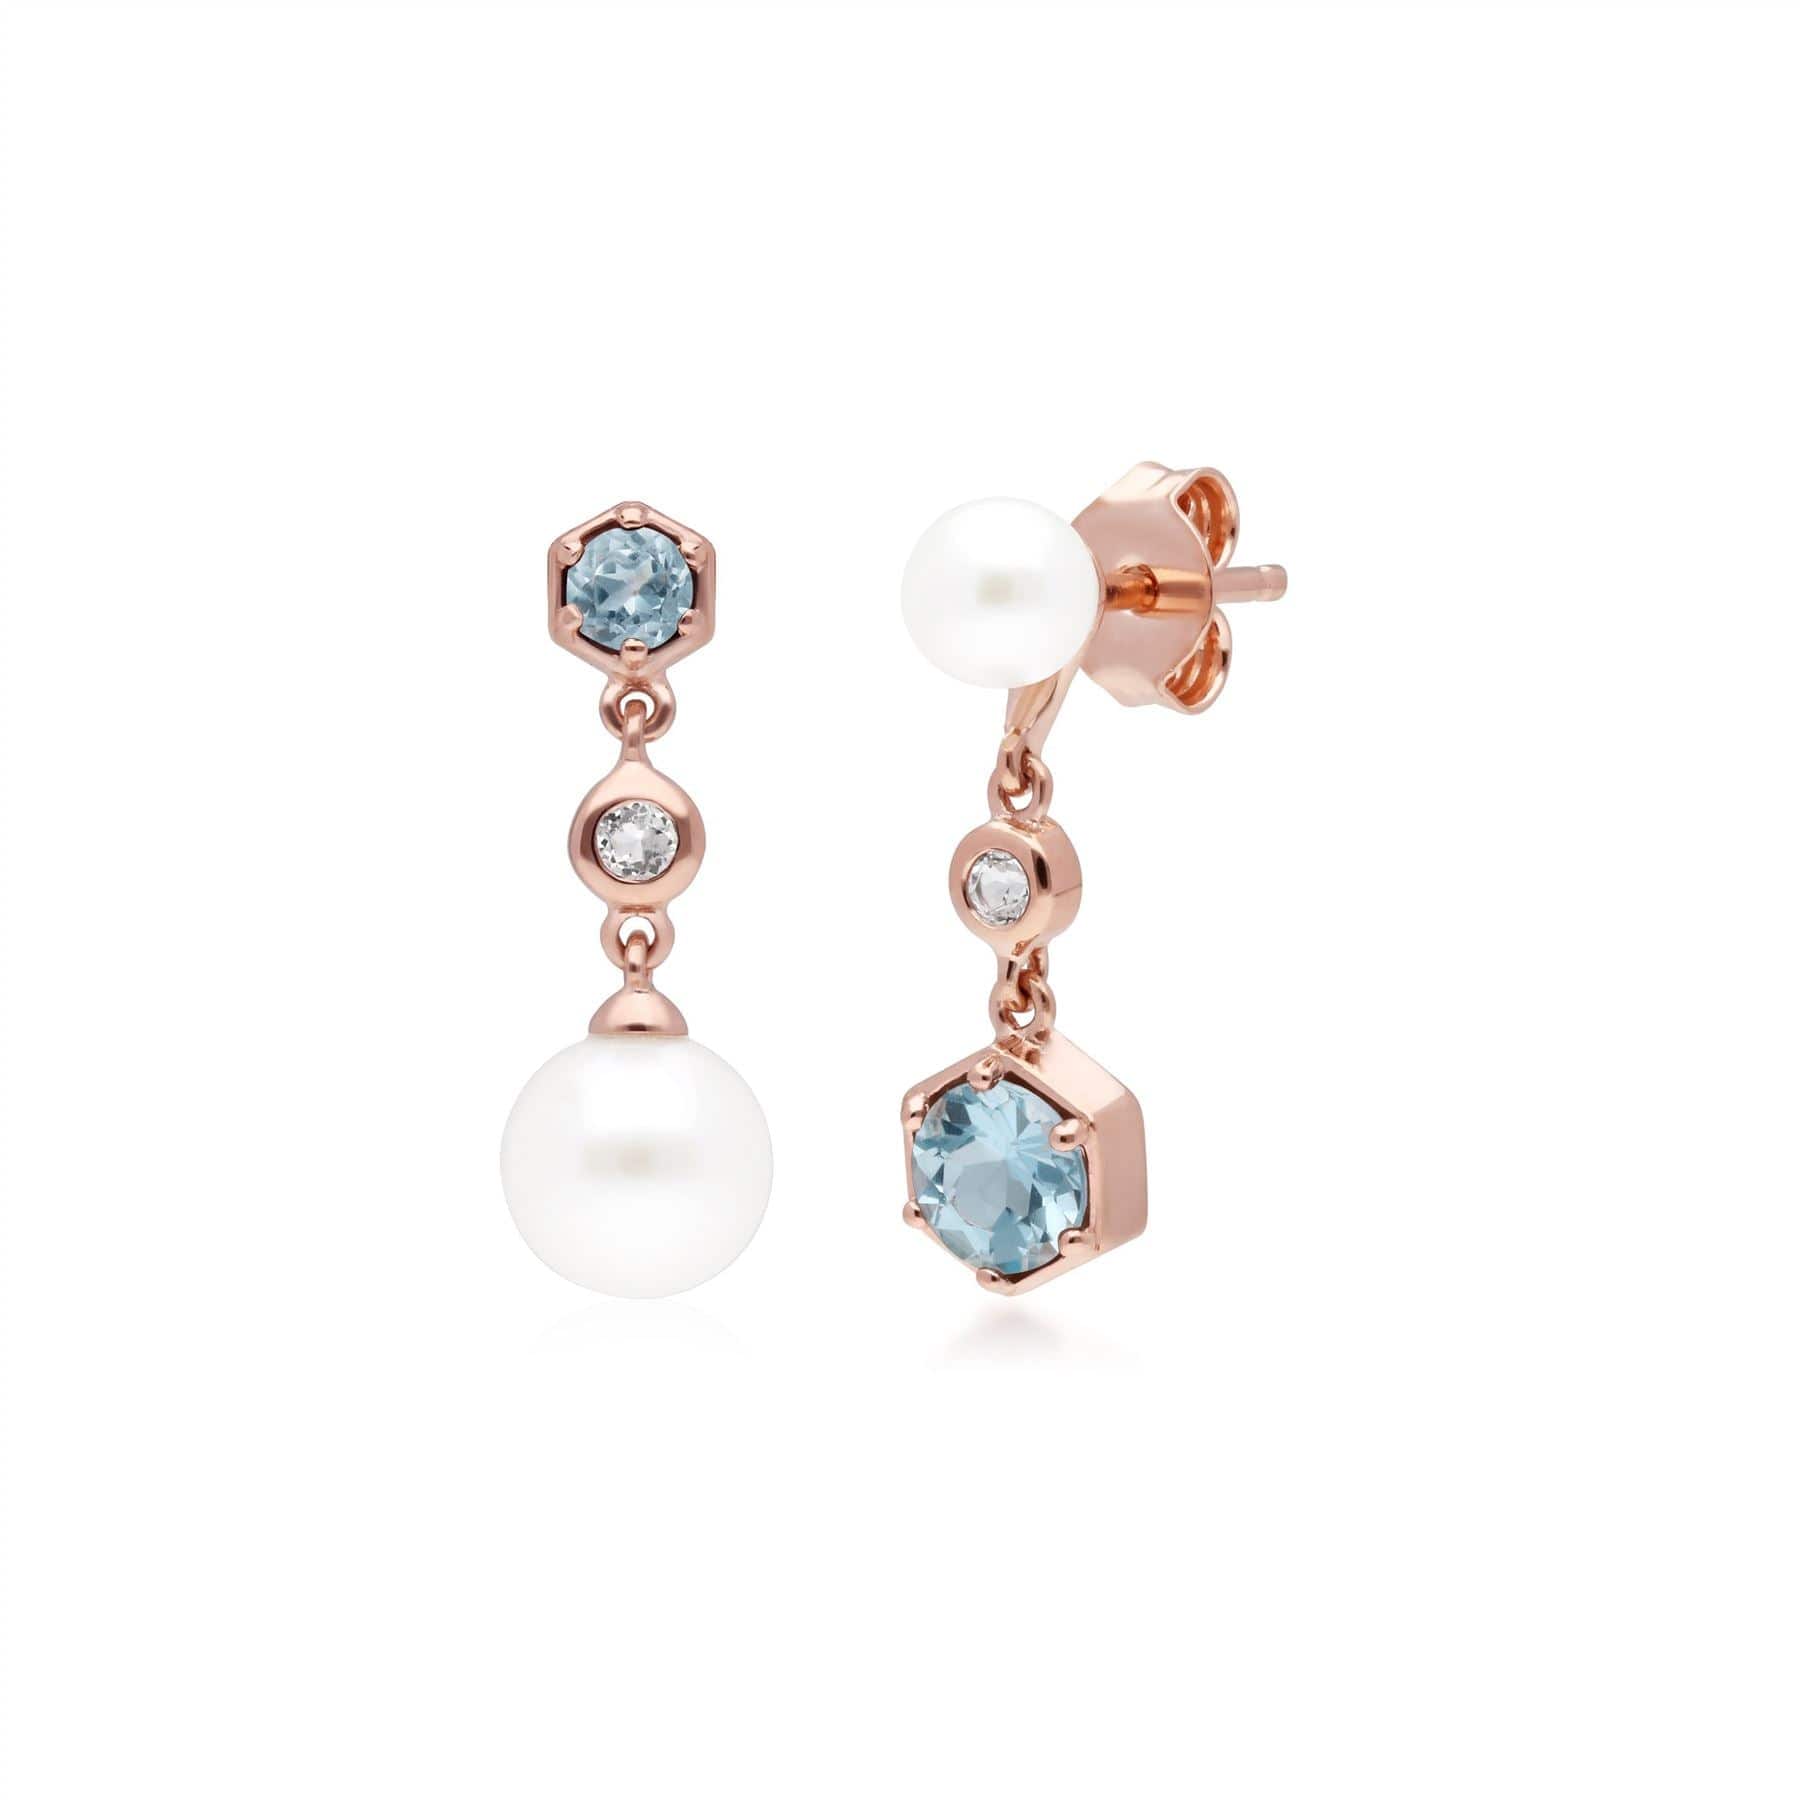 270E030310925 Modern Pearl, White & Blue Topaz Mismatched Drop Earrings in Rose Gold Plated Silver 1